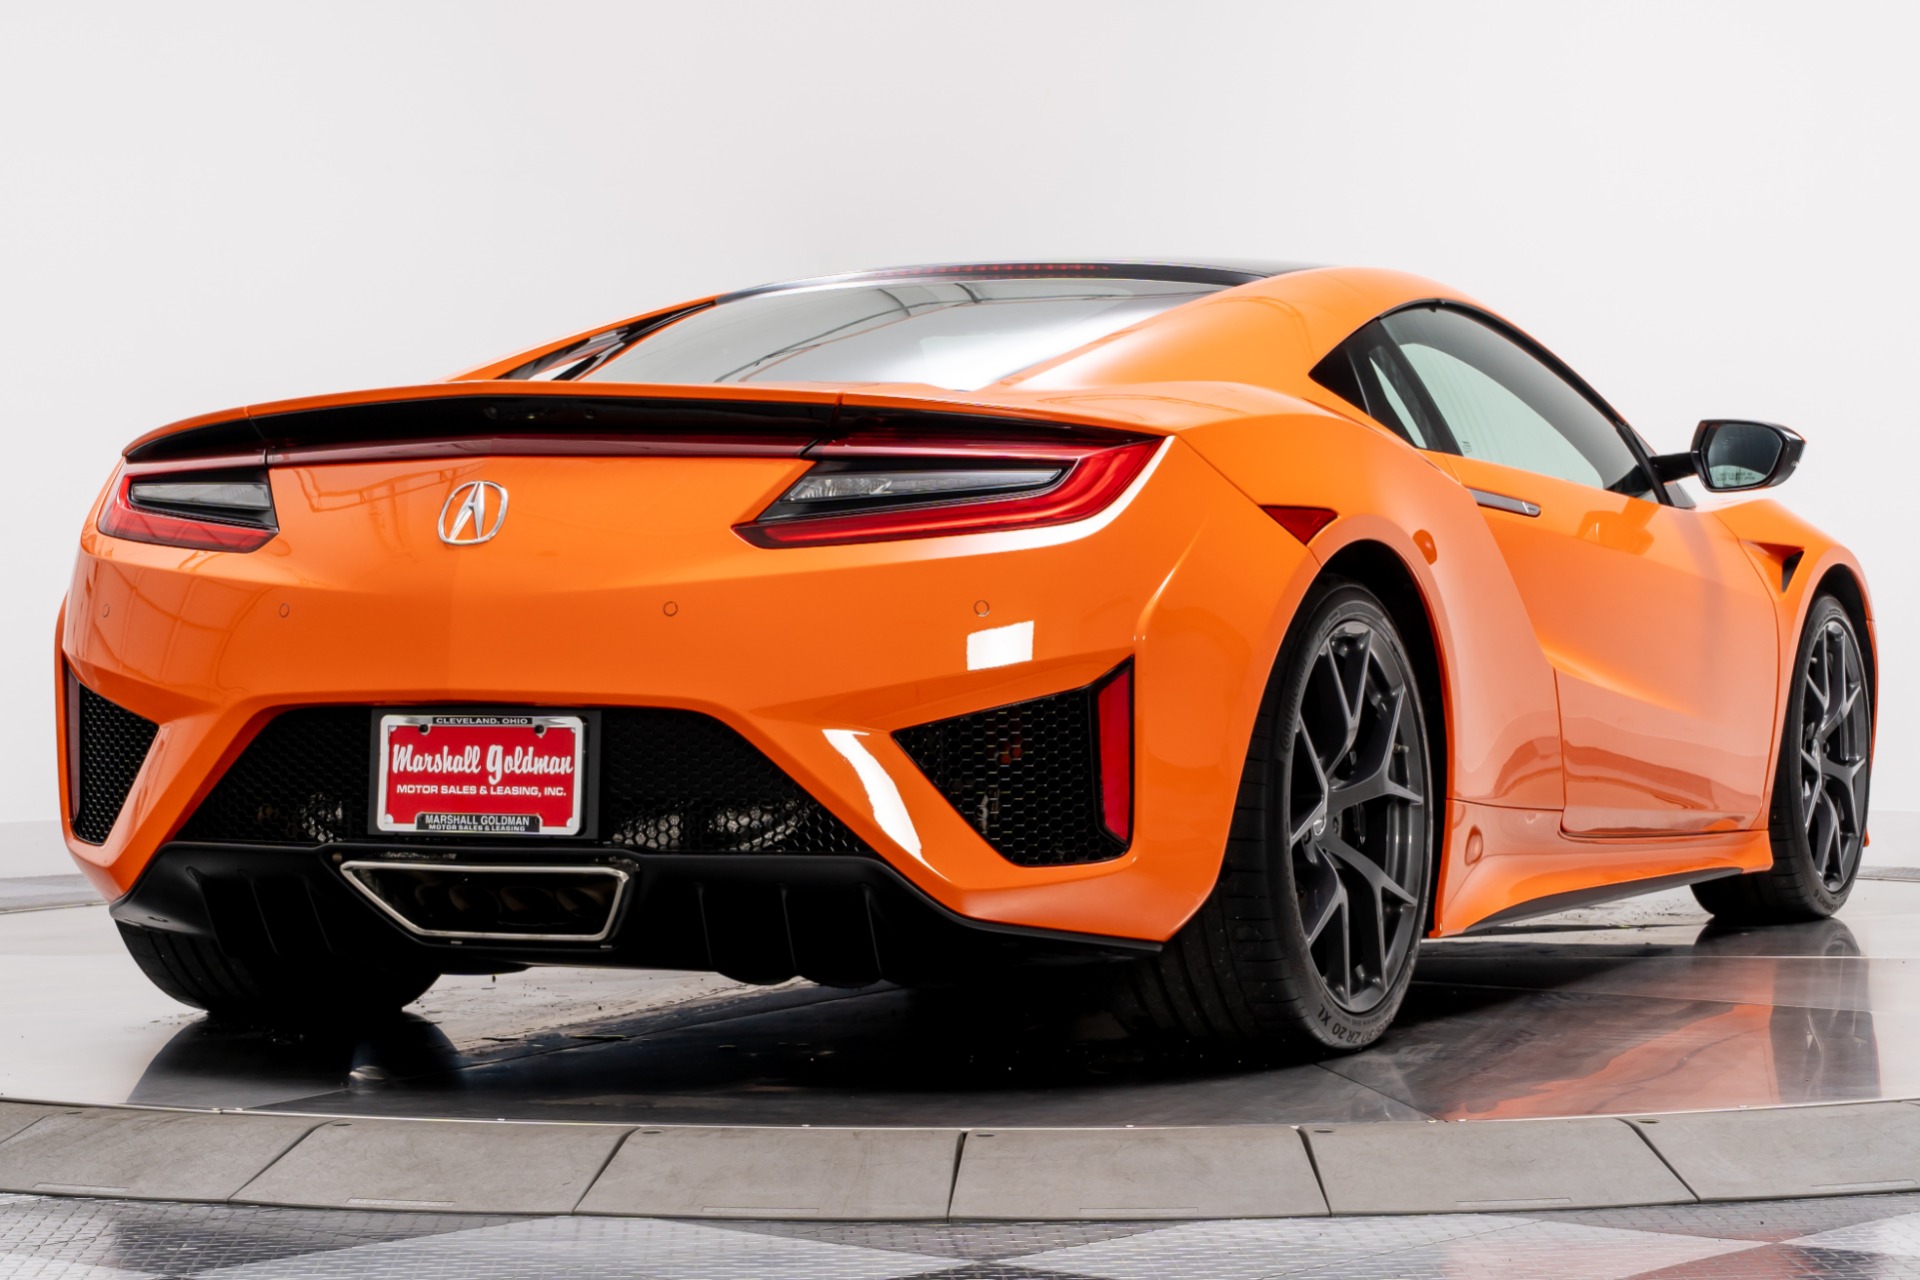 Used 2019 Acura Nsx For Sale Sold Marshall Goldman Motor Sales Stock Stk000060